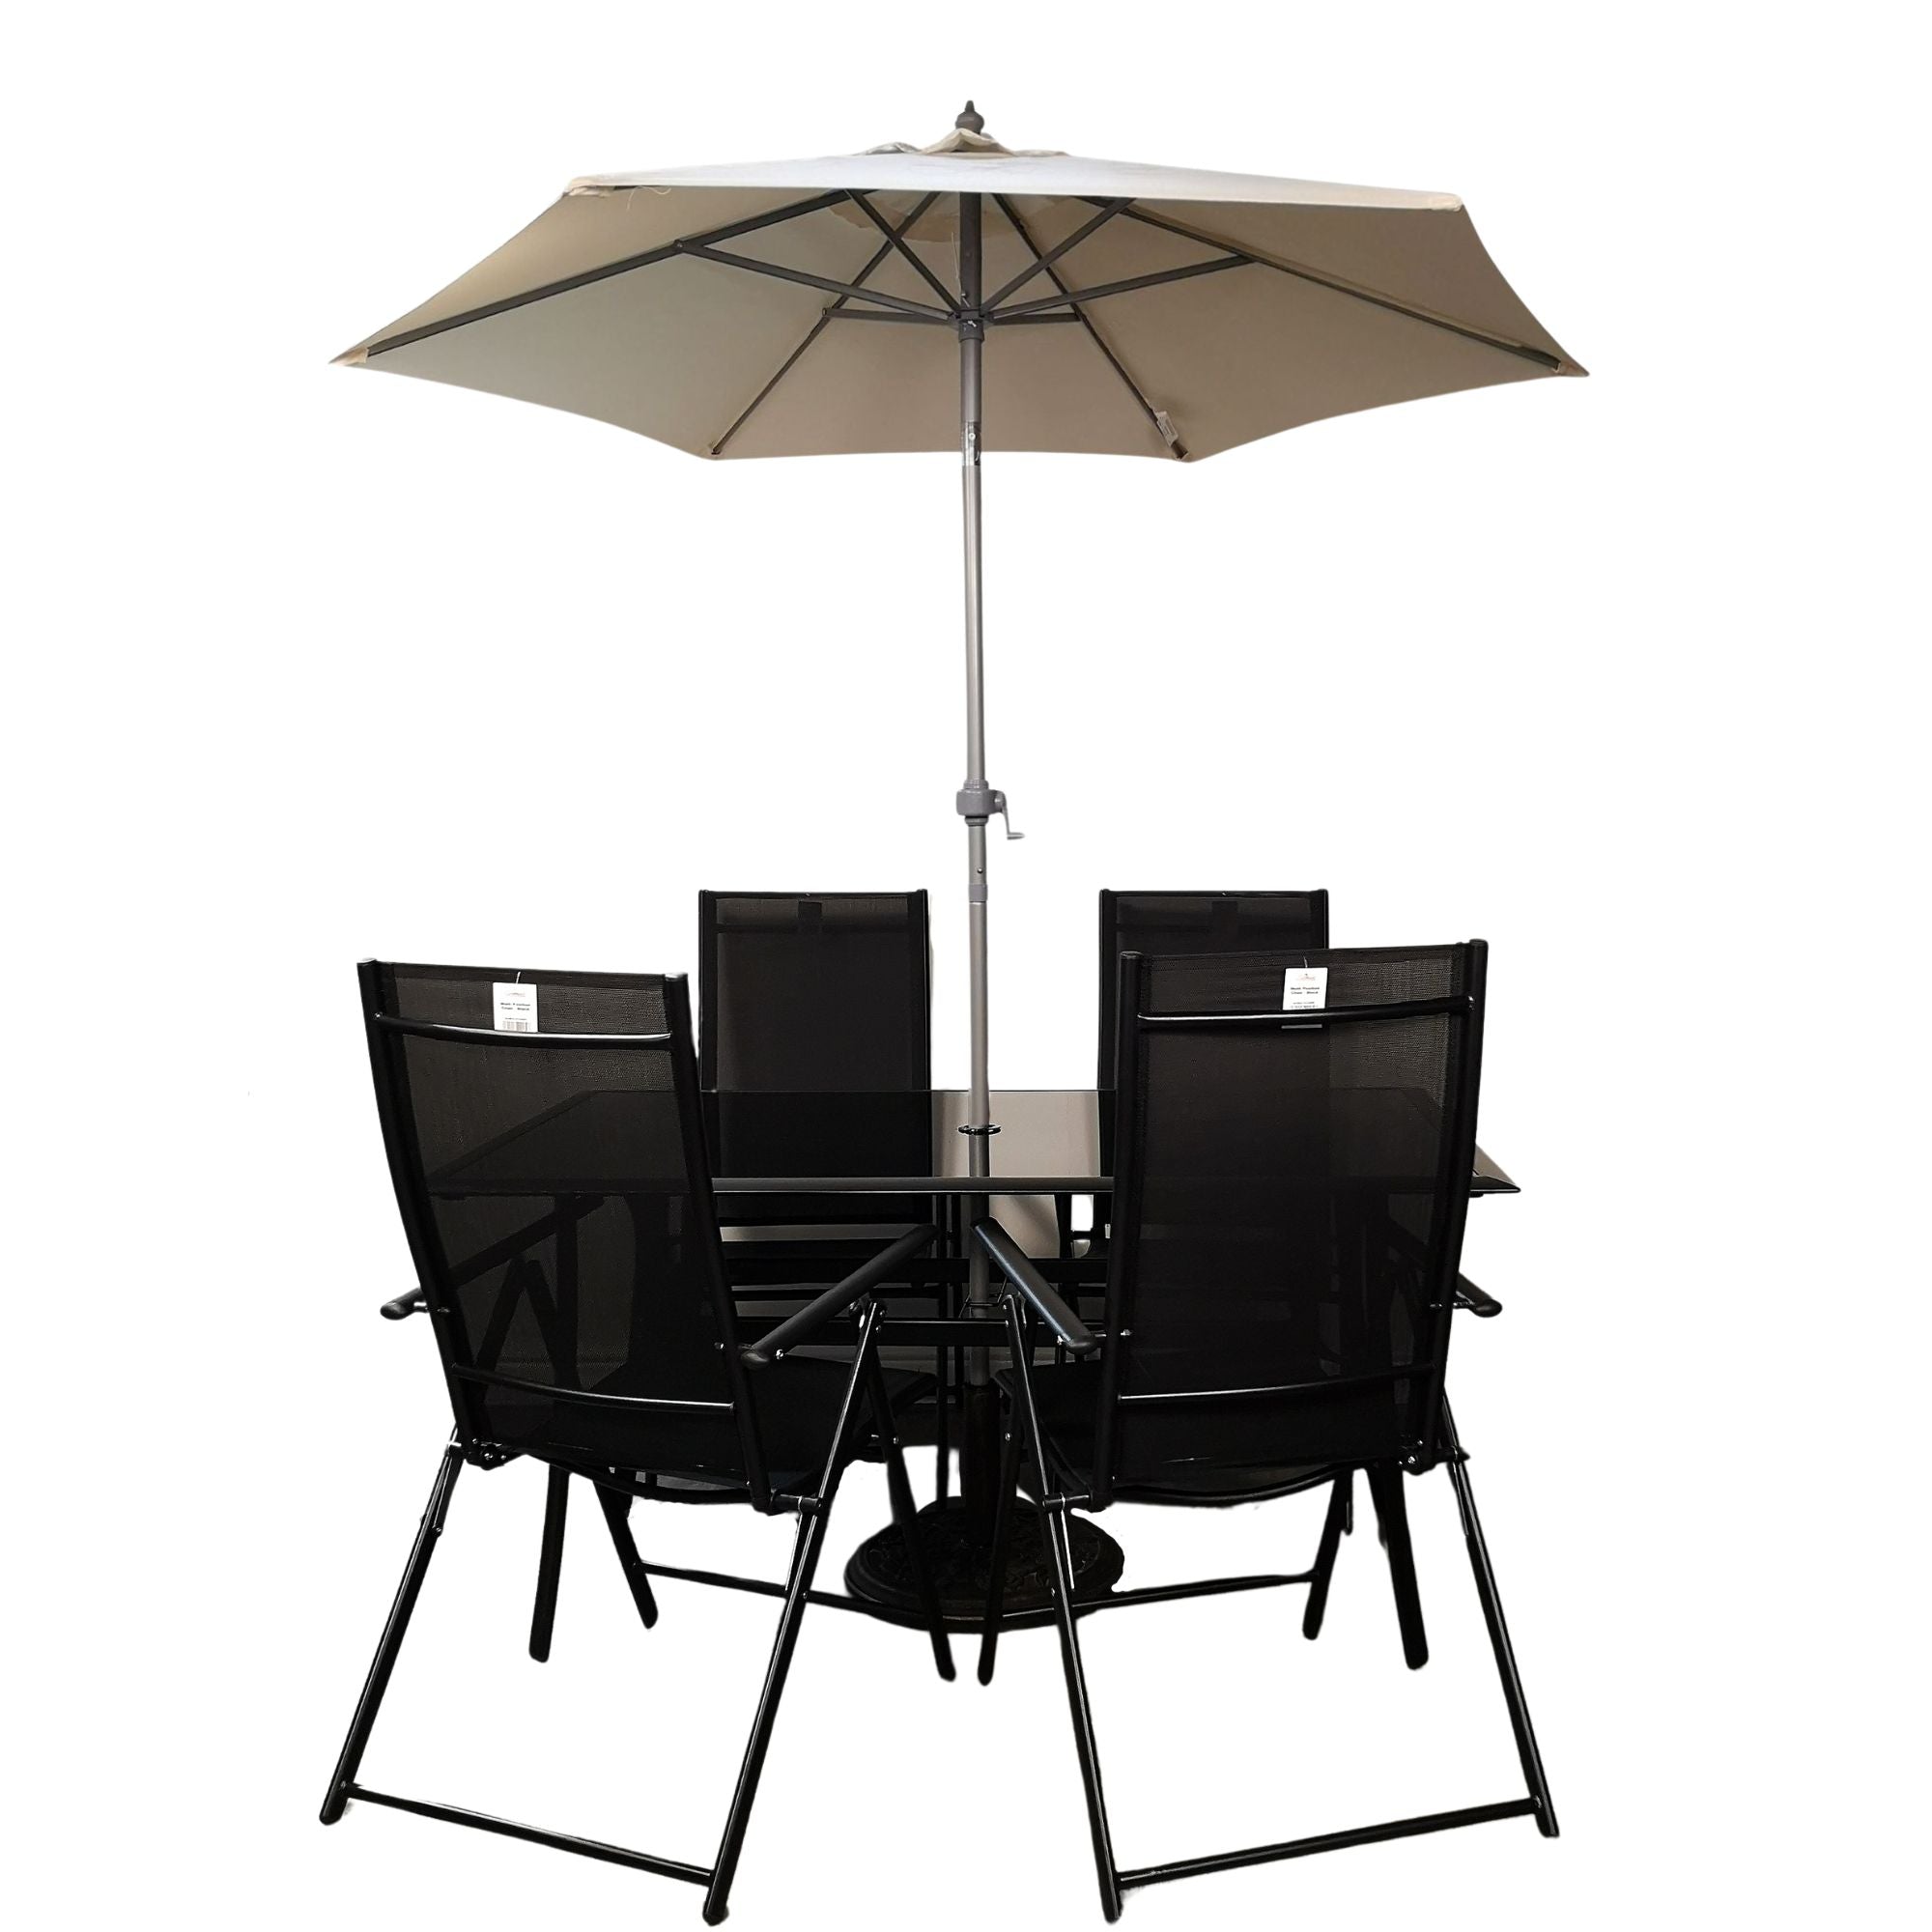 Outdoor 4 Person Rectangular Glass Top Garden Patio Dining Table Chairs Cream Parasol and Base Set